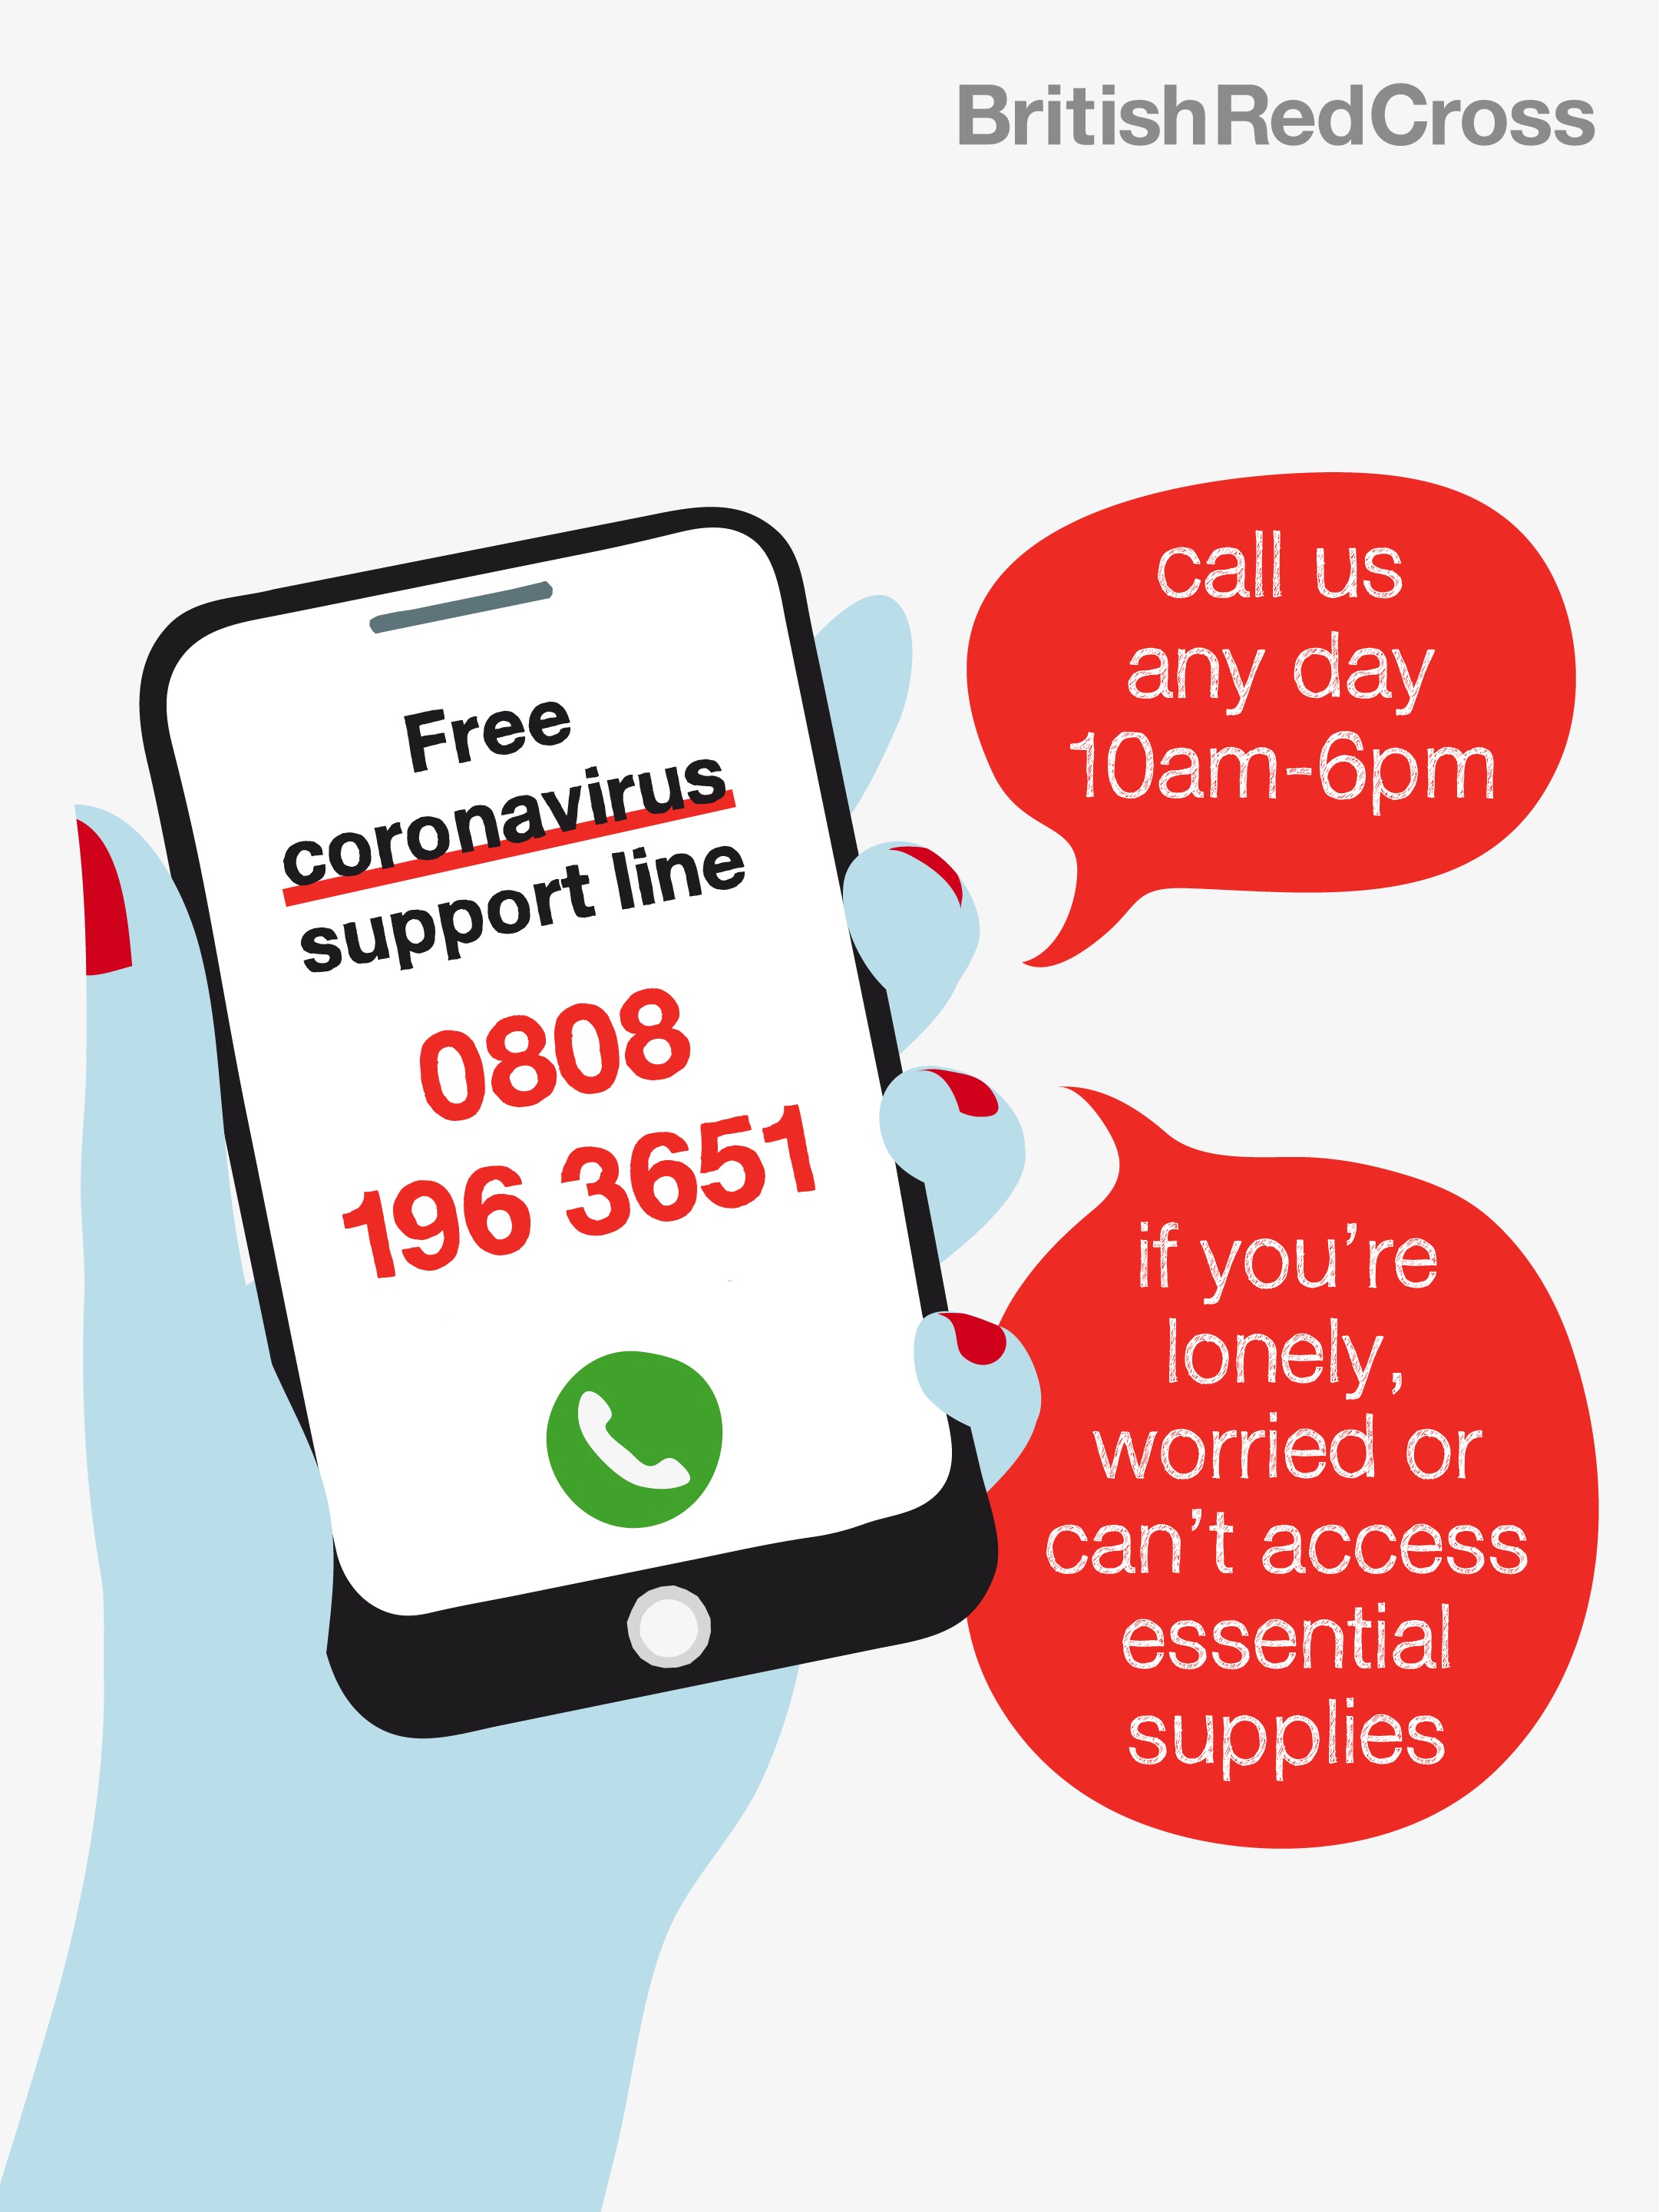 Coronavirus support line illustration showing mobile phone with the contact information